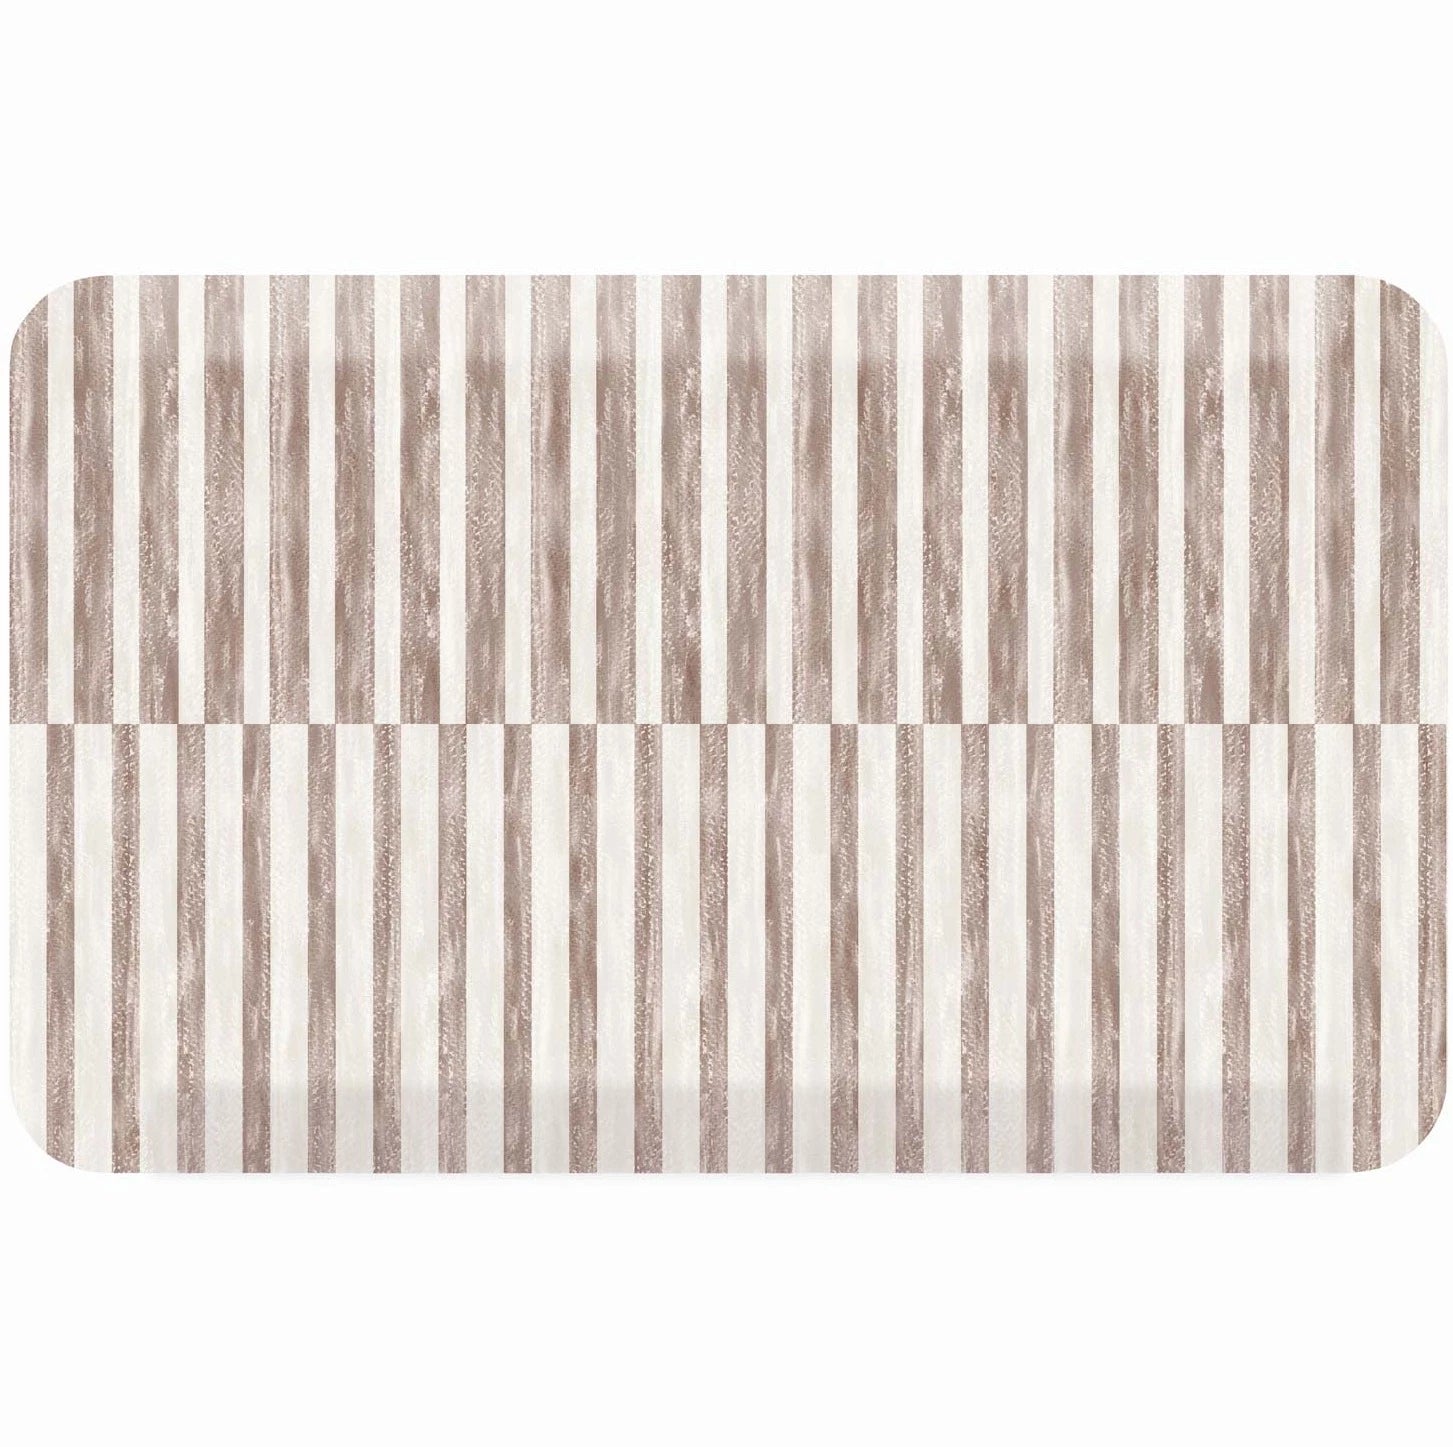 Reese chai beige and white inverted stripe standing mat shown in size 22x36